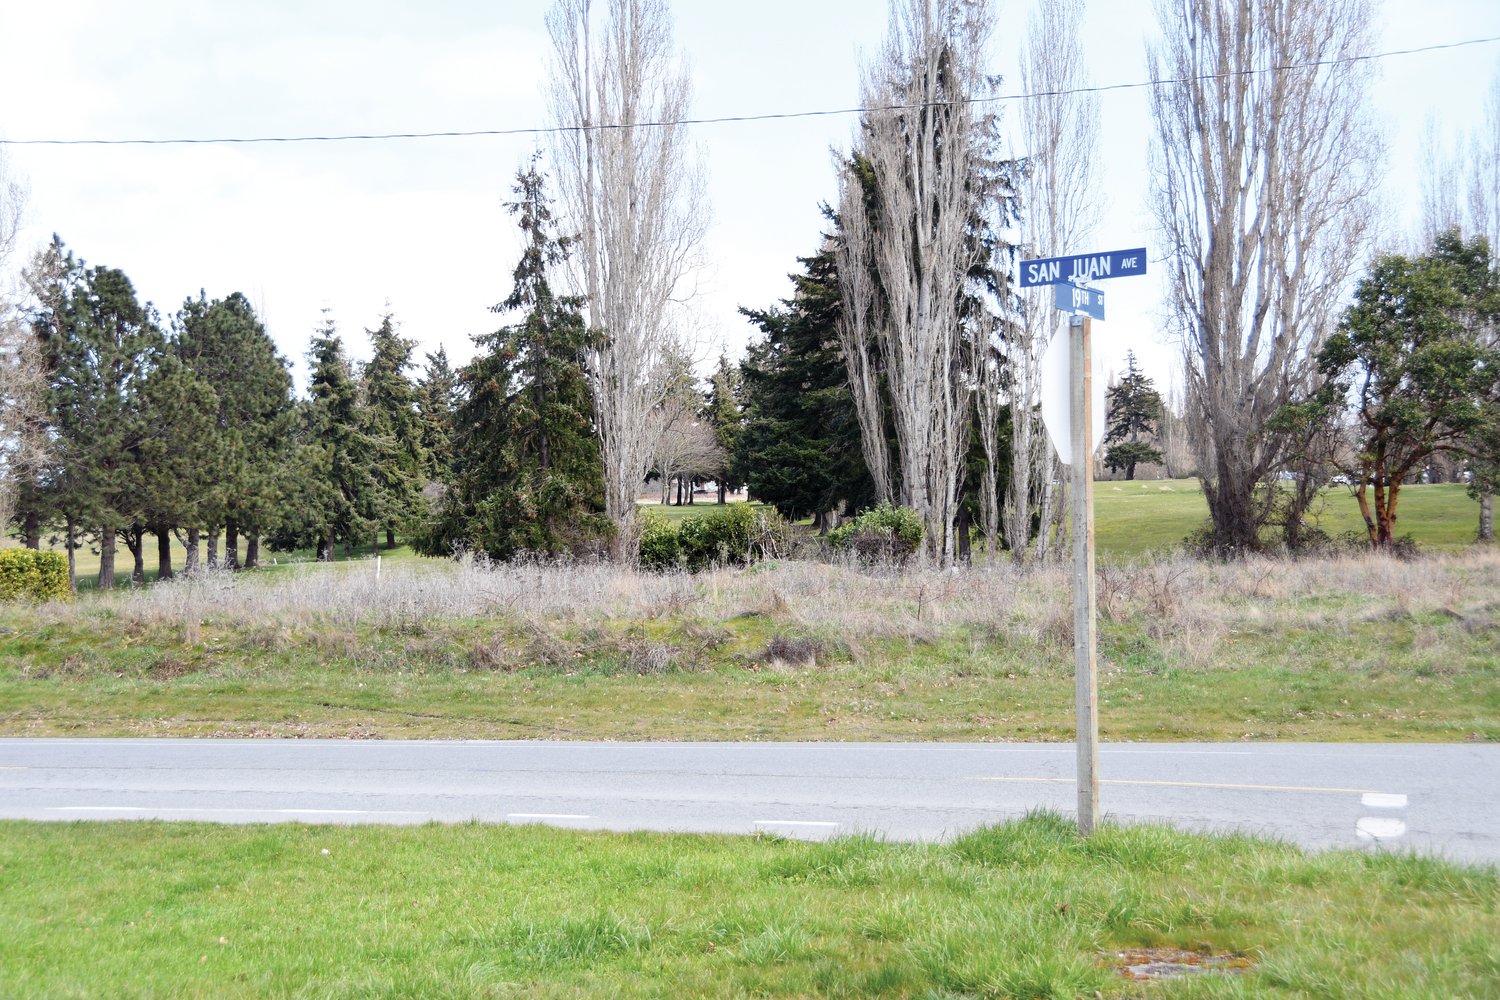 Situated at the San Juan Avenue and Blaine Street intersection, this parcel of land on the southwest corner of the Port Townsend Golf Course could become the location of the city’s Healthier Together Aquatics Center.